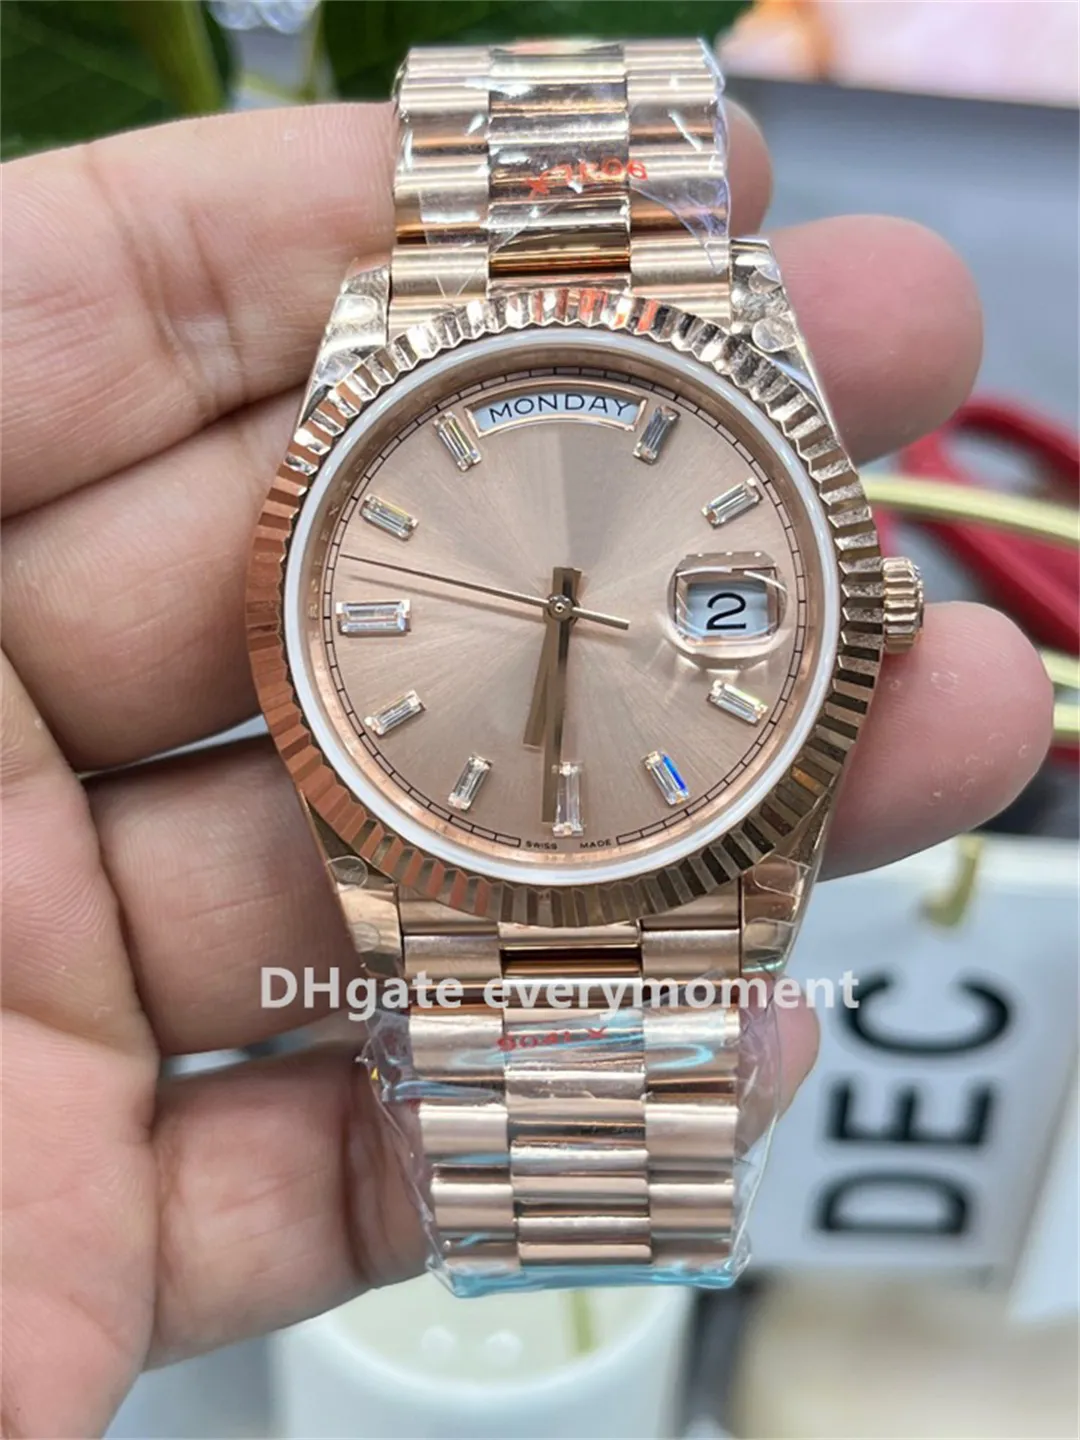 GM Factory Men's Watches 228235 Day-Date 40mm Automatic Mechanical 2836 Movement Sapphire Night Glow Deep Waterproof Rose Gold Luxury Wristwatches Real photos taken